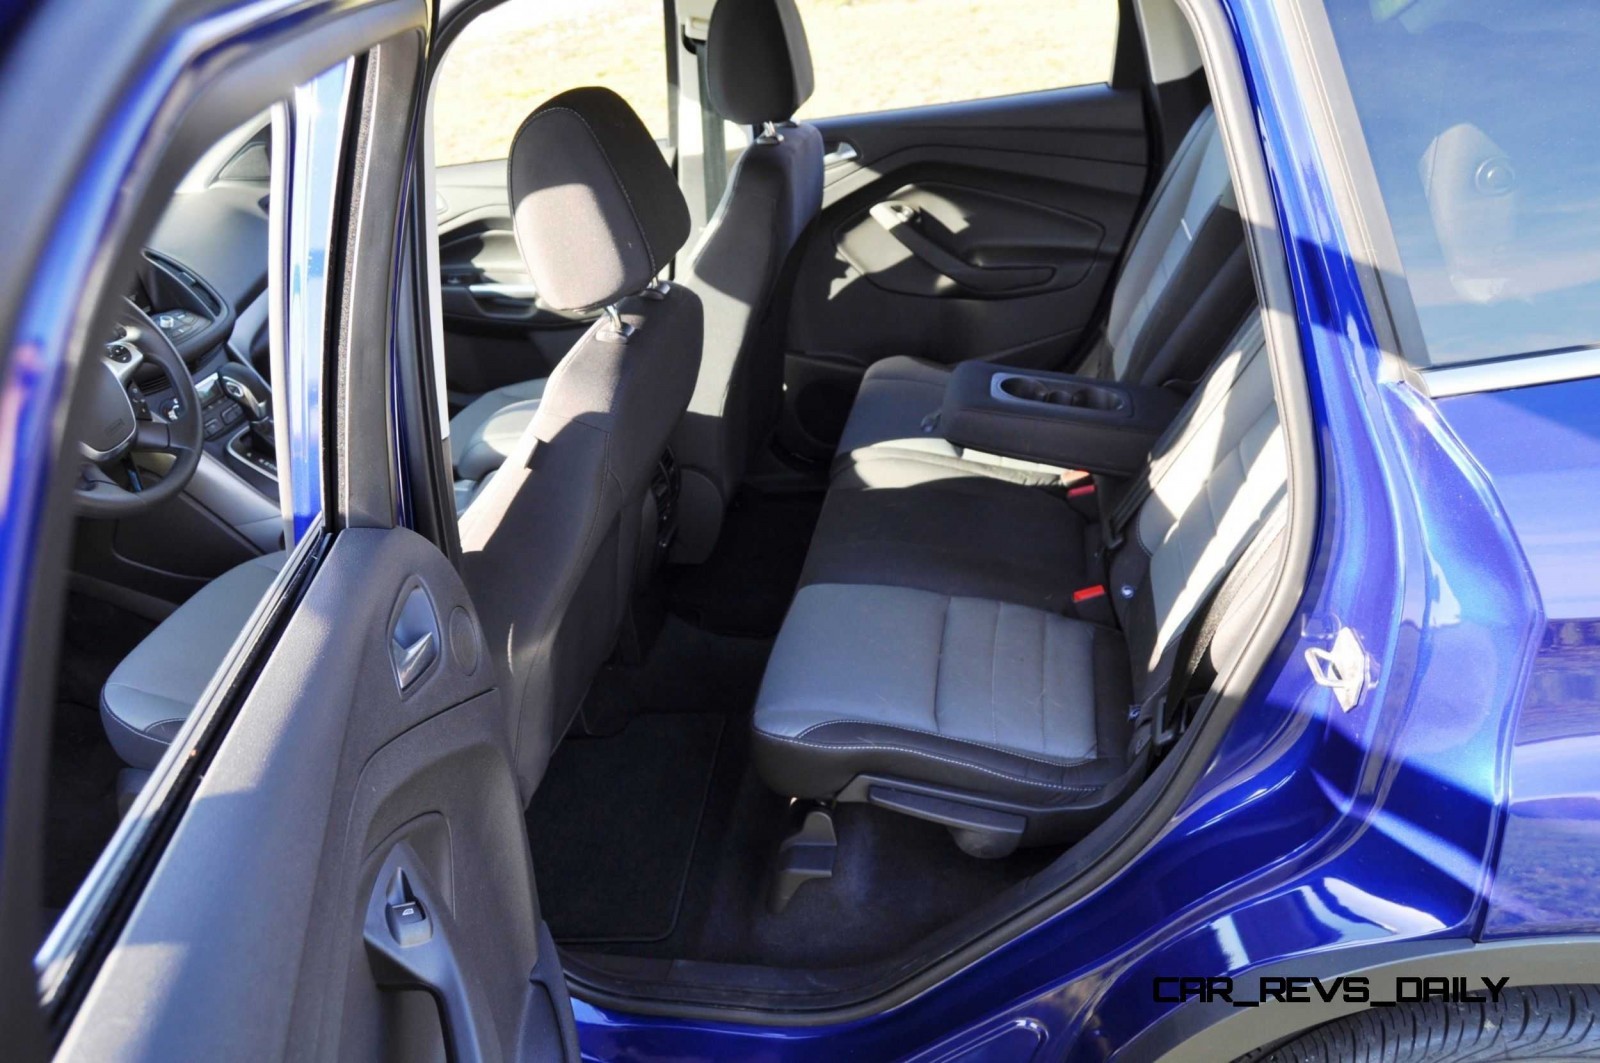 2014 Ford Escape 1.6L EcoBoost in Deep Impact Blue - 69 All-New Photos ...